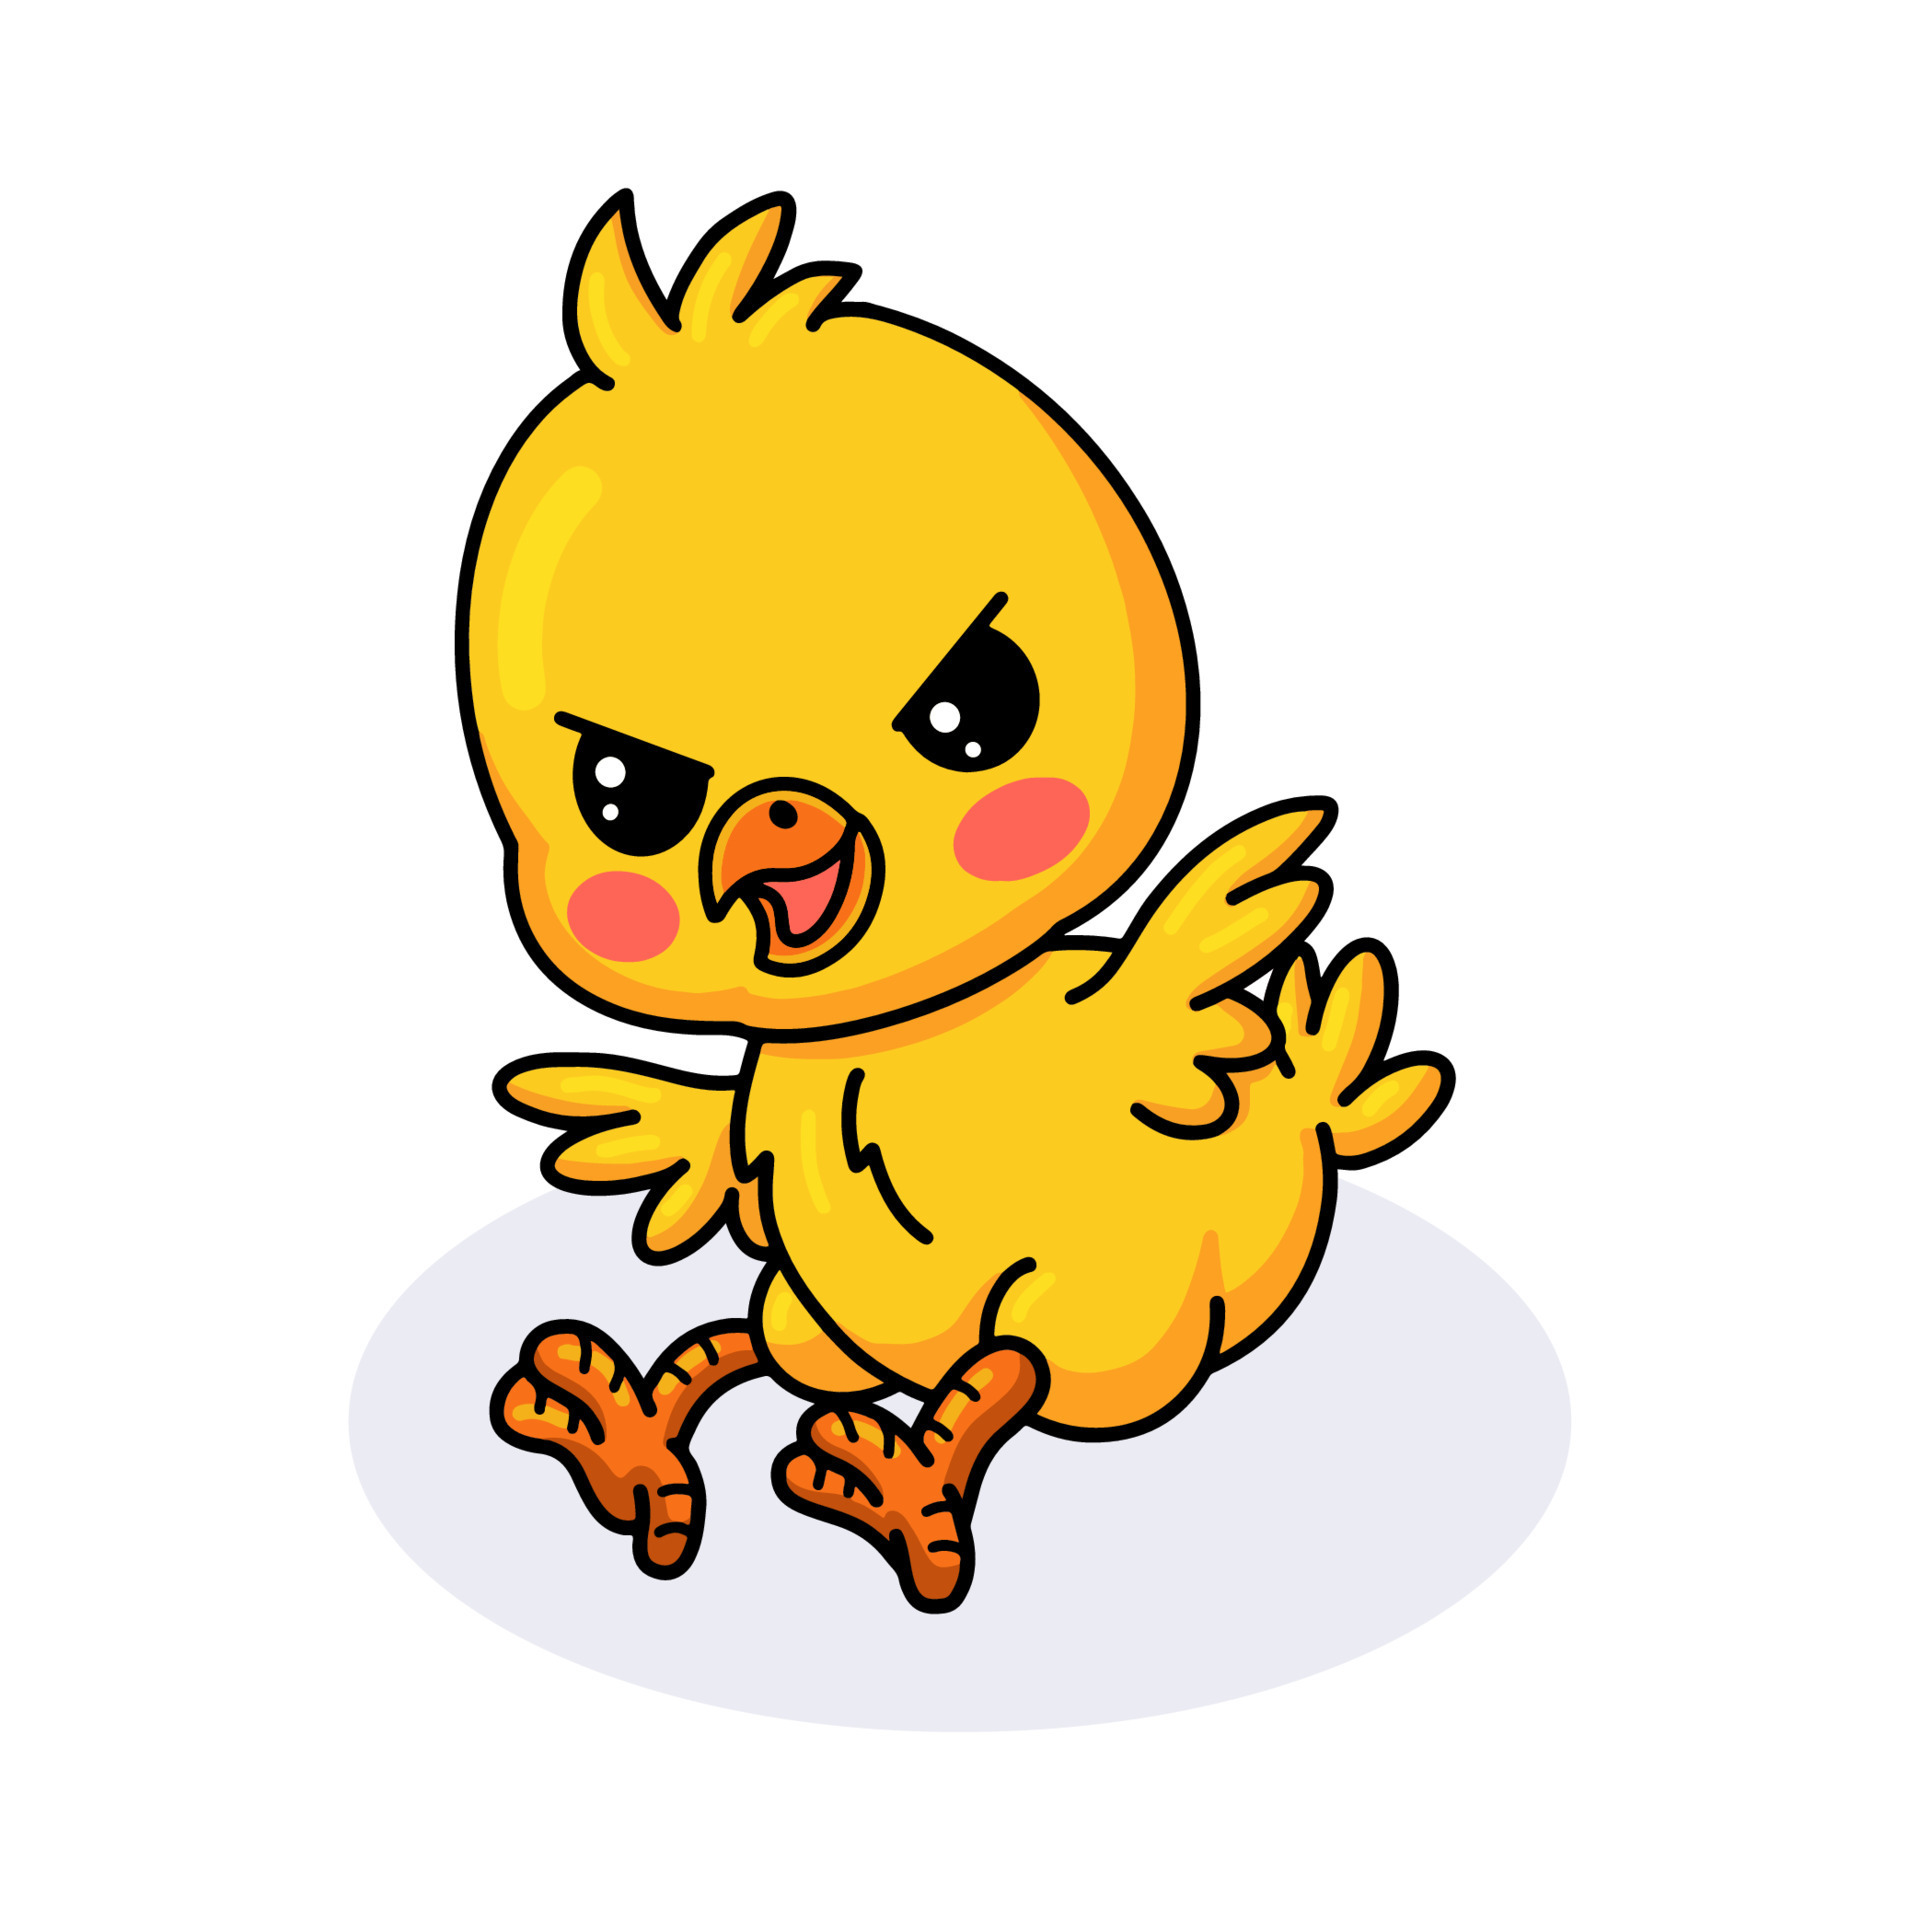 celeste salzwedel recommends picture of a cartoon chick pic